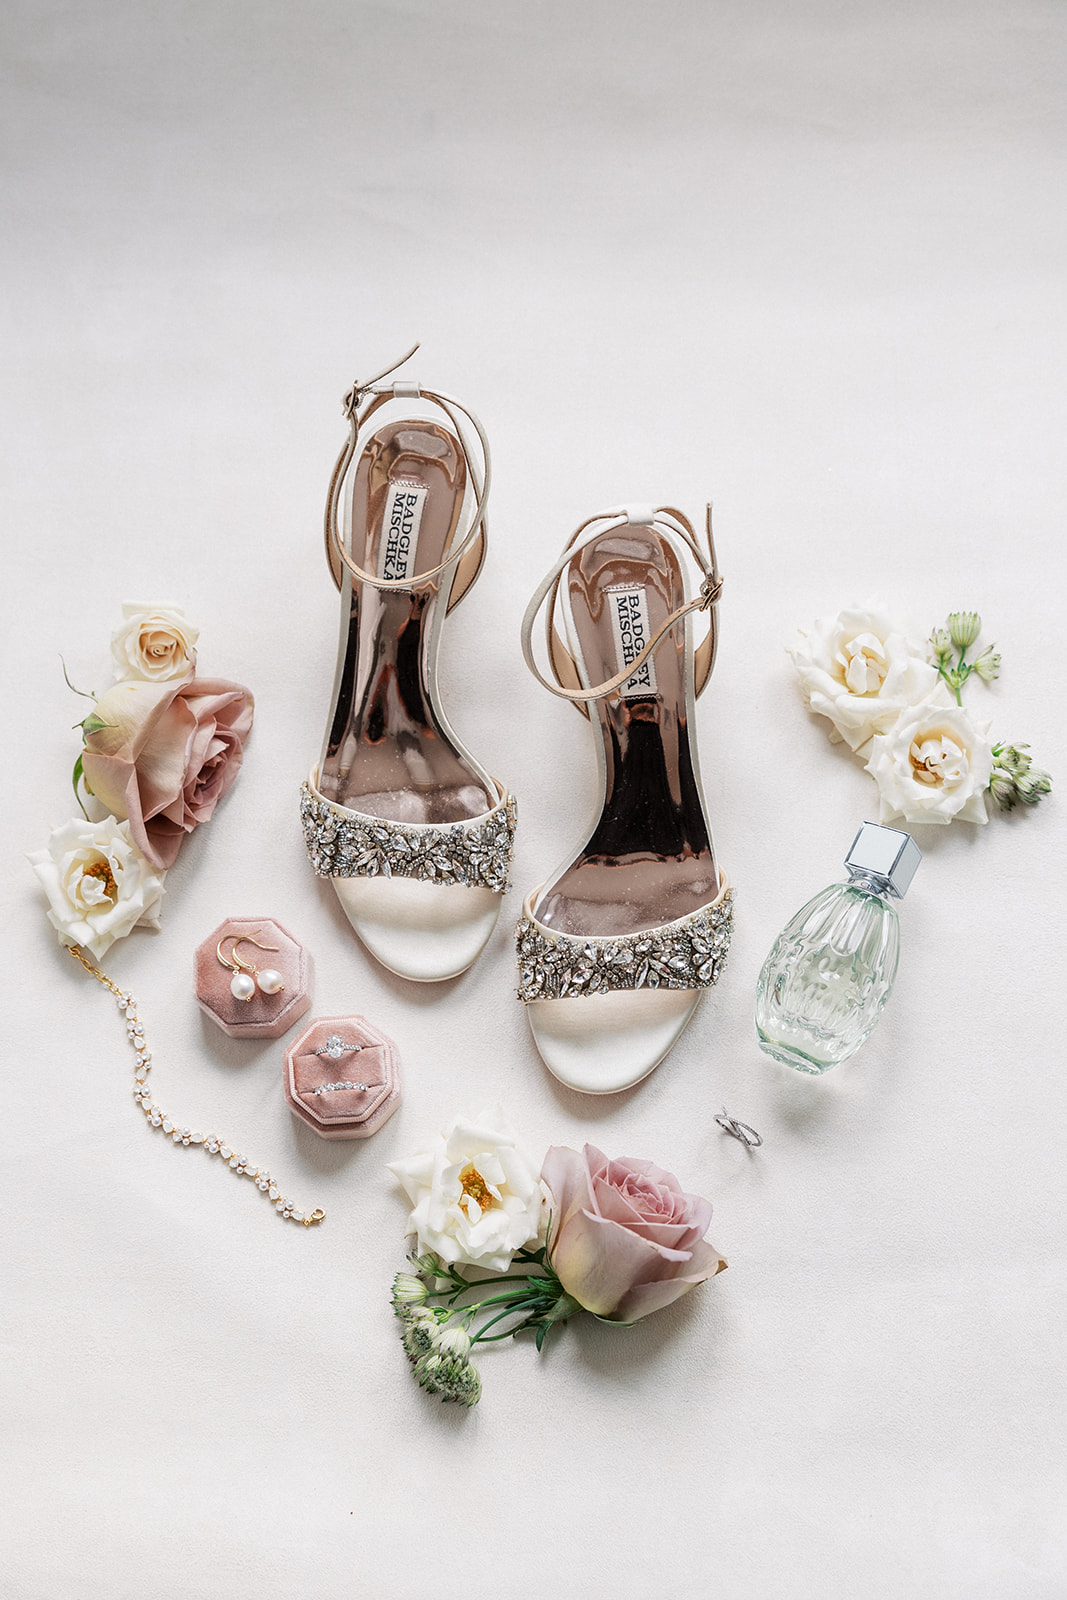 Bridal details sitting on a white table with shoes, perfume and jewelry